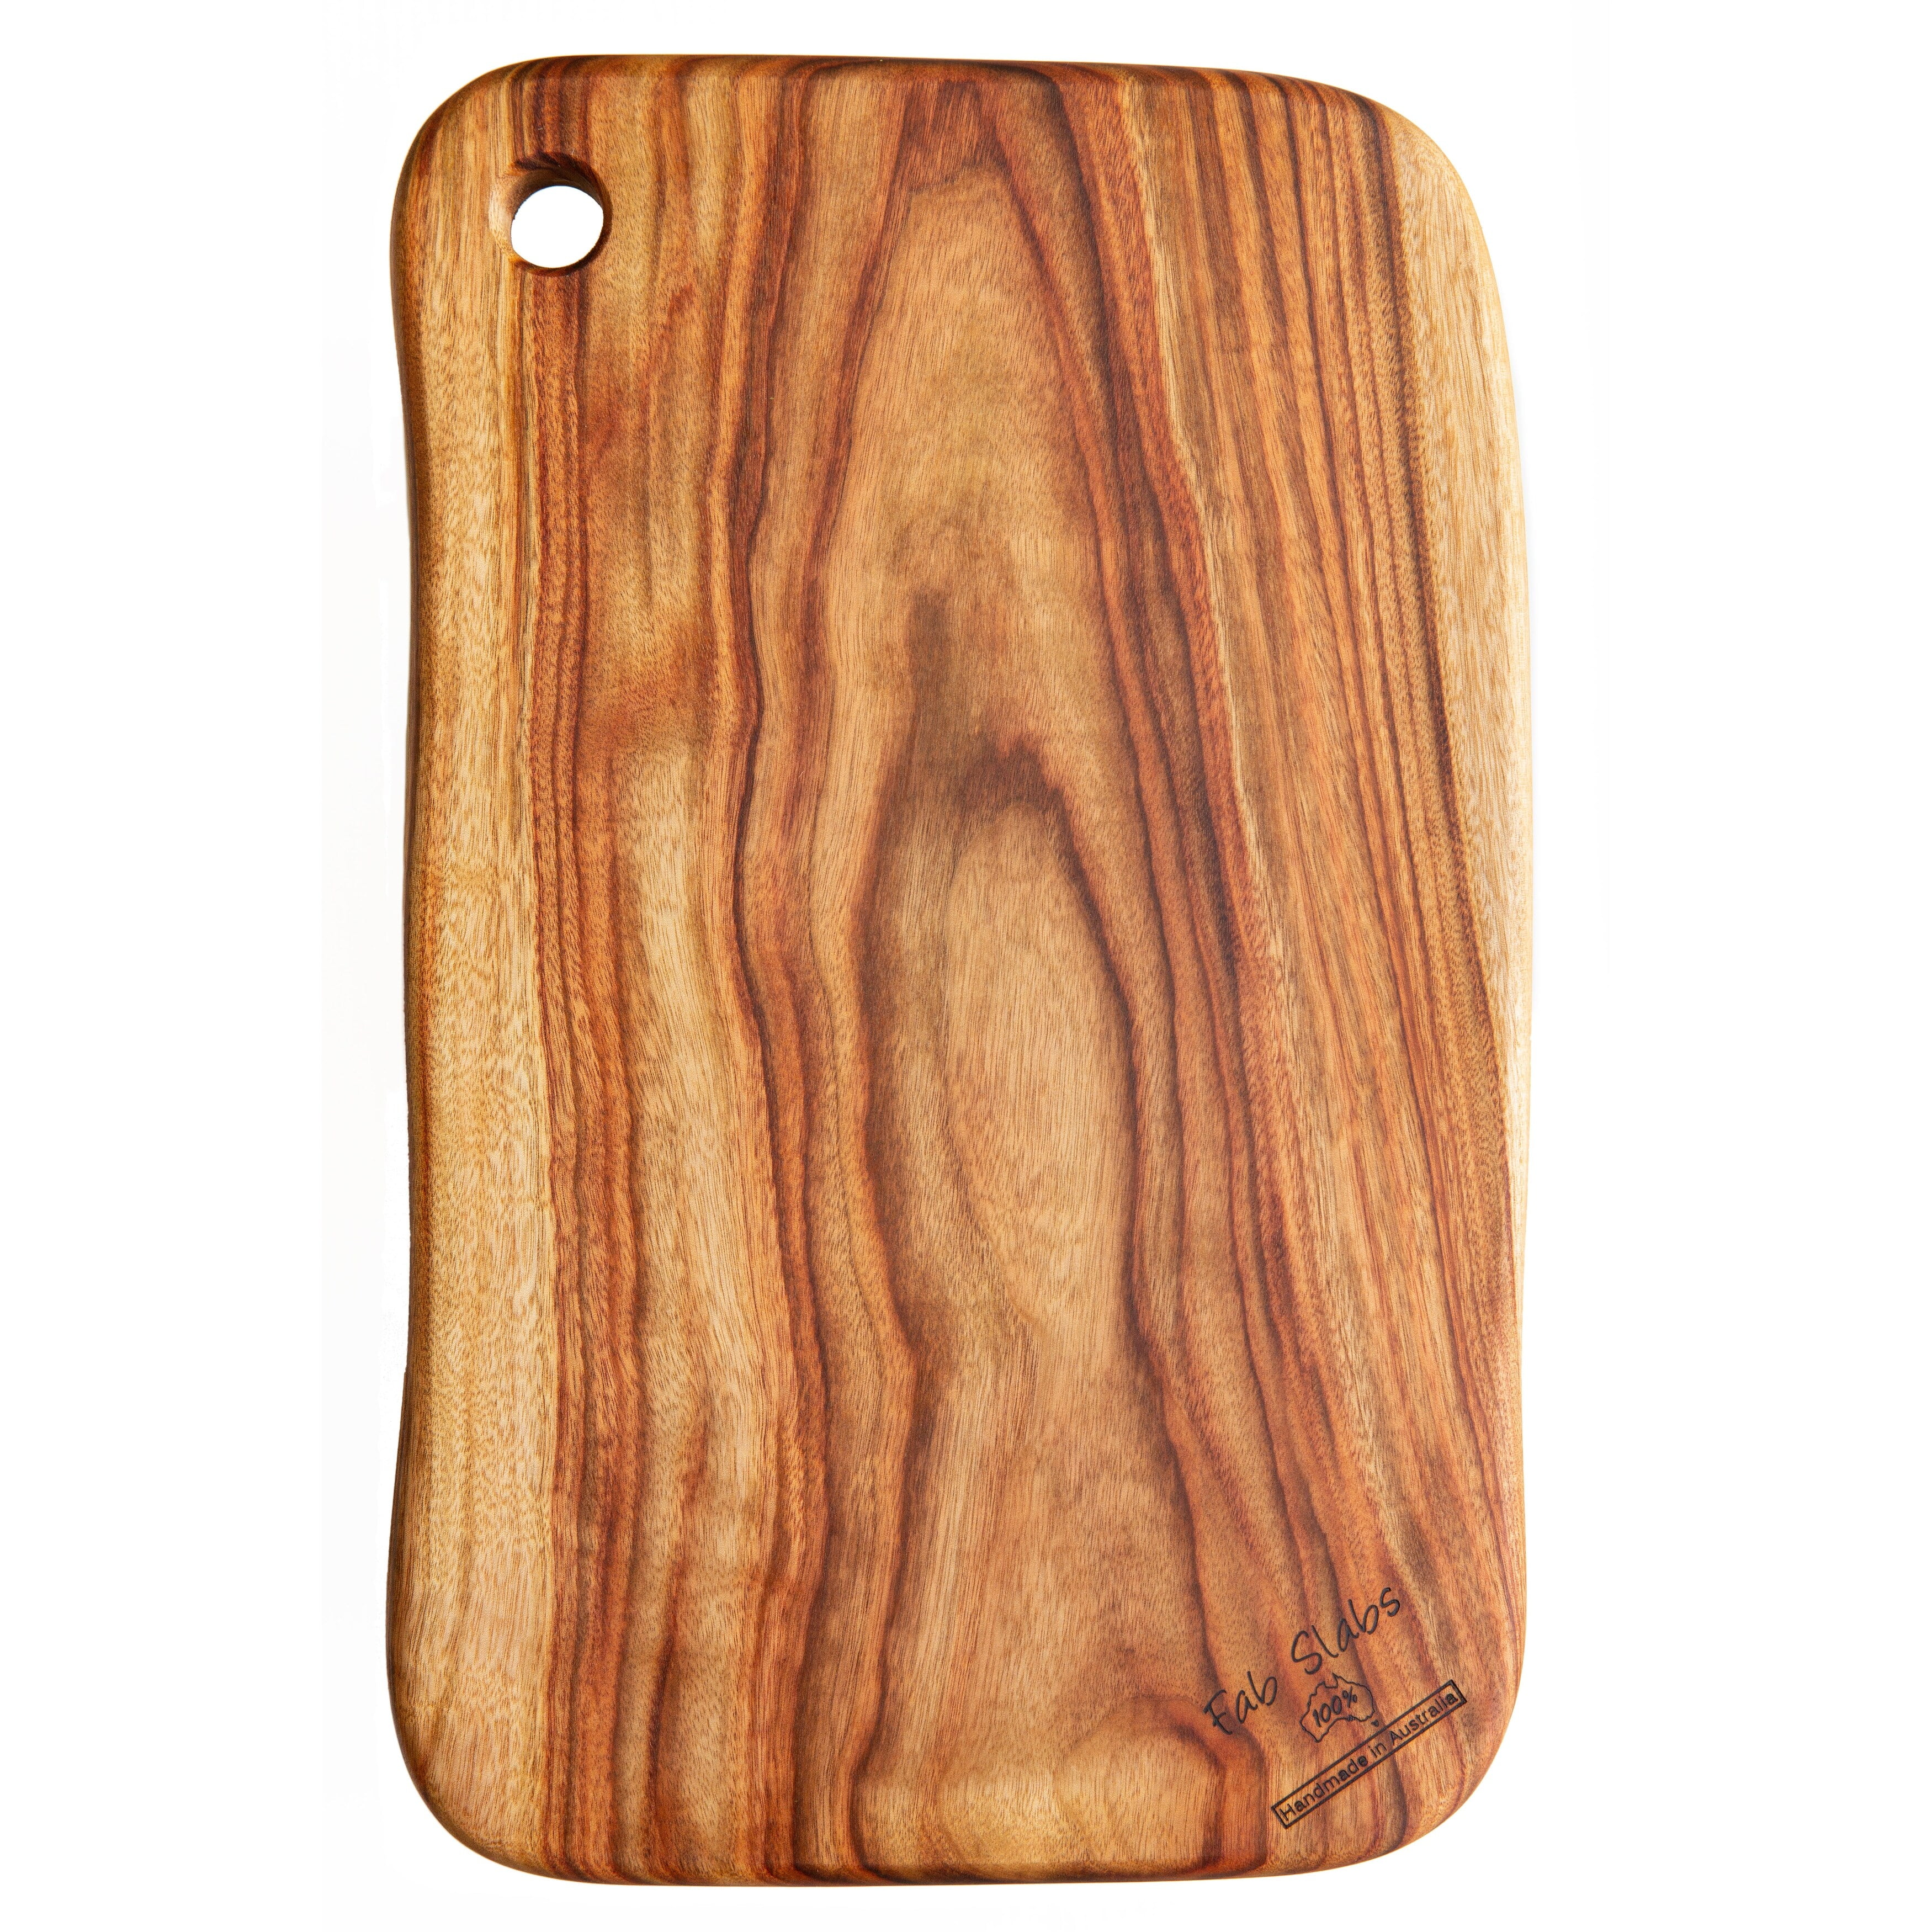 YOUSUNLONG 20x16 inch Acacia Wood Cutting Boards - 1.5'' Thick with Juice  Groove and Handles Kitchen Chopping Board 